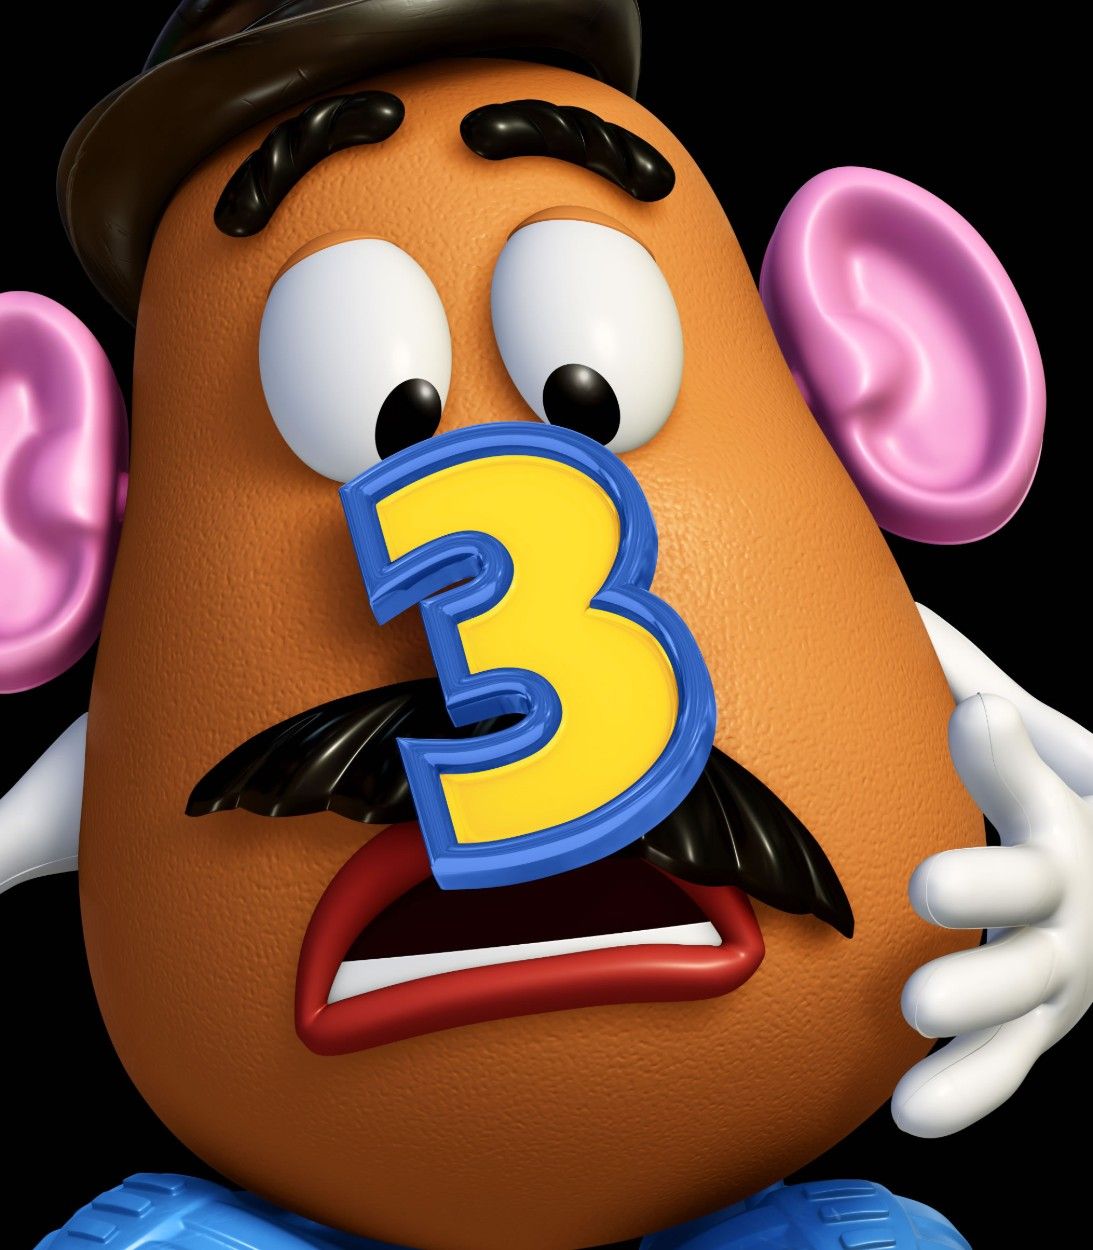 Mr Potato Head Toy Story 3 poster Vertical